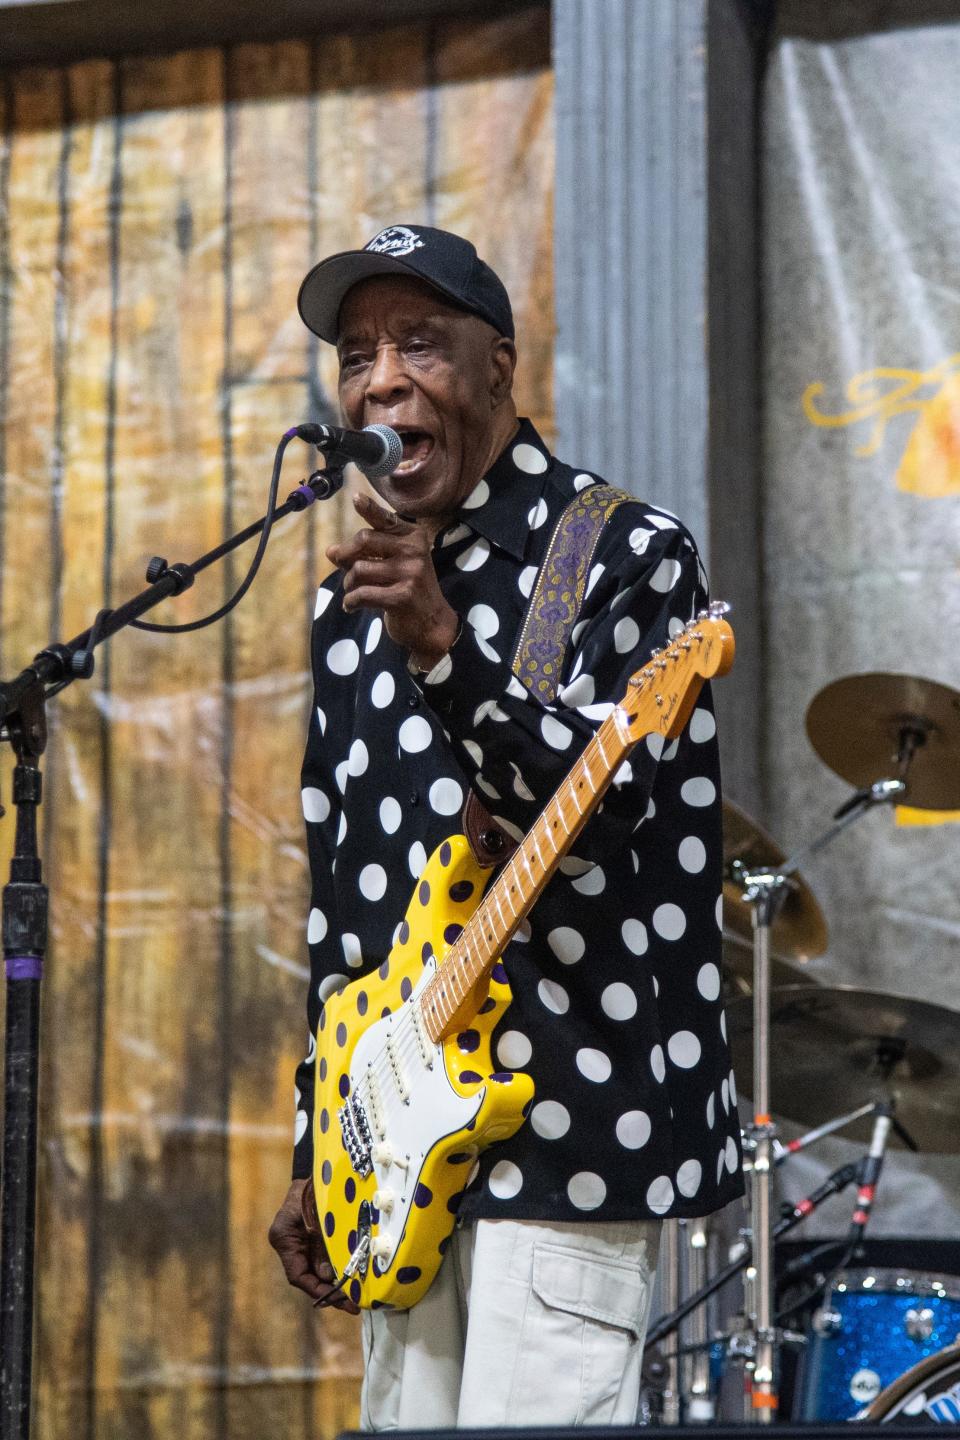 Buddy Guy will perform July 28 at Centennial Terrace.